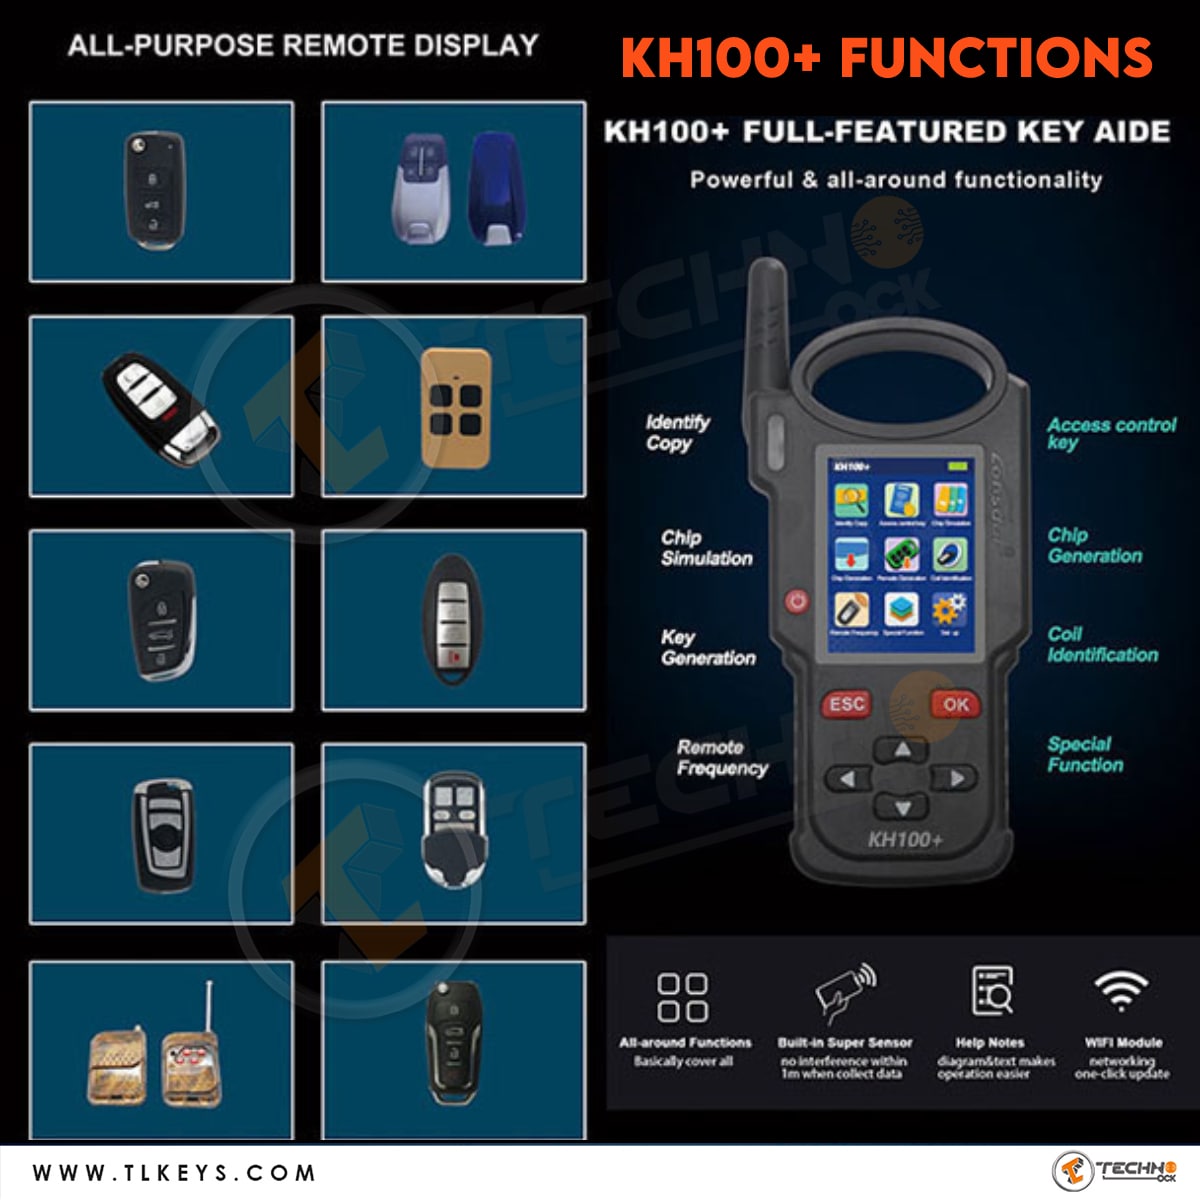  KH100+ FULL-FEATURED KEY AIDE Powerful & all-around functionality